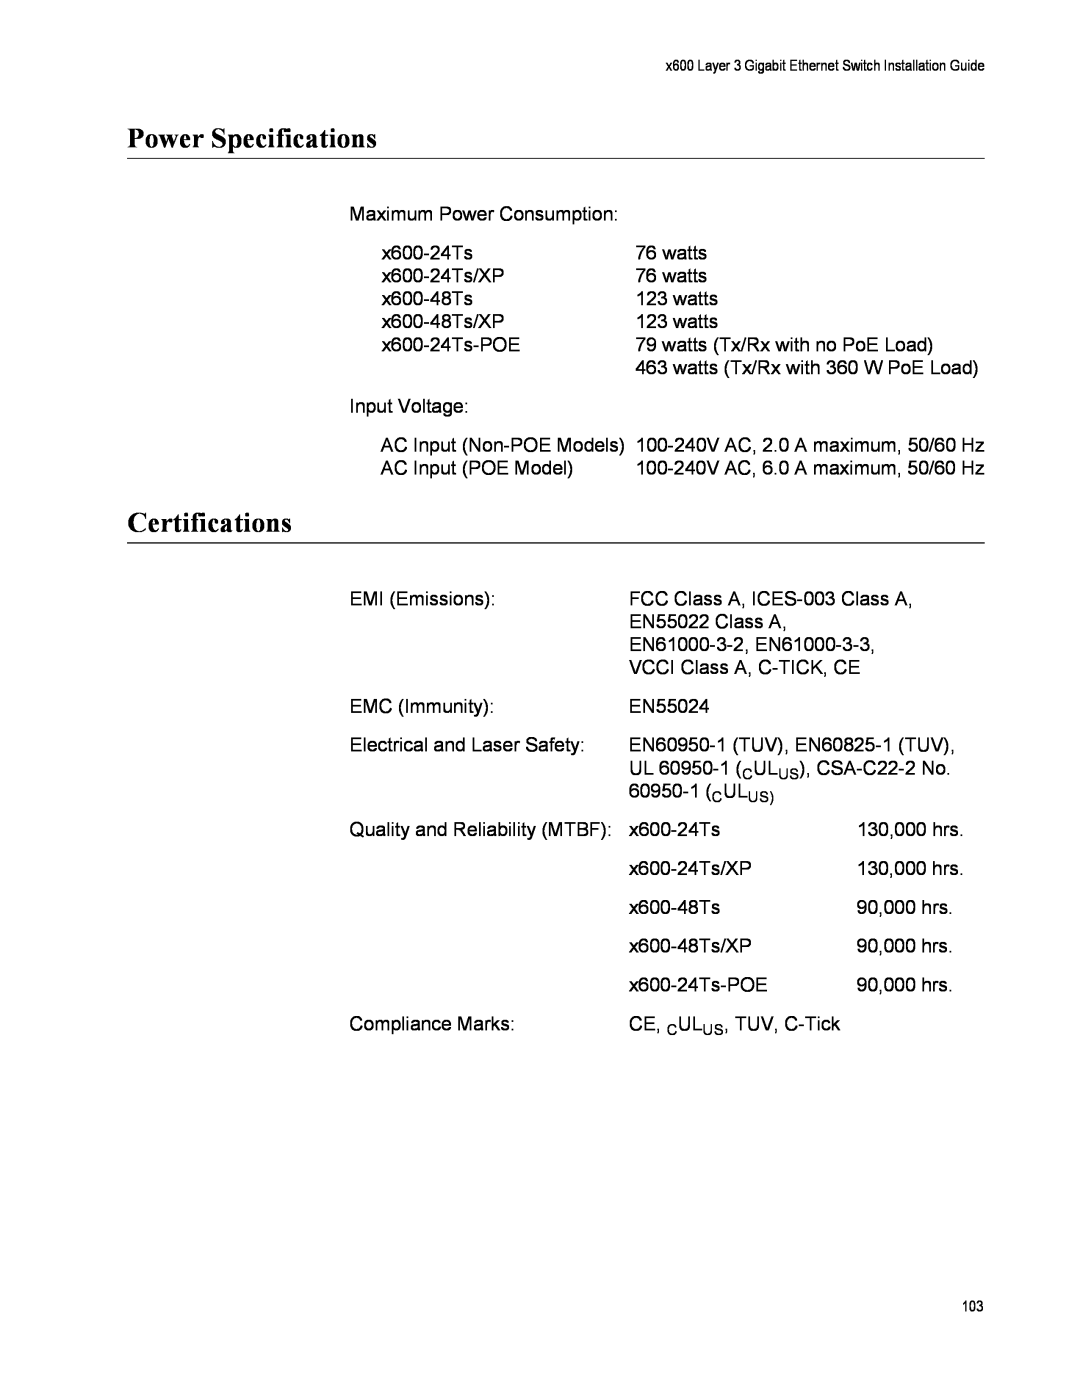 Allied Telesis x600-24Ts-POE manual Power Specifications, Certifications 